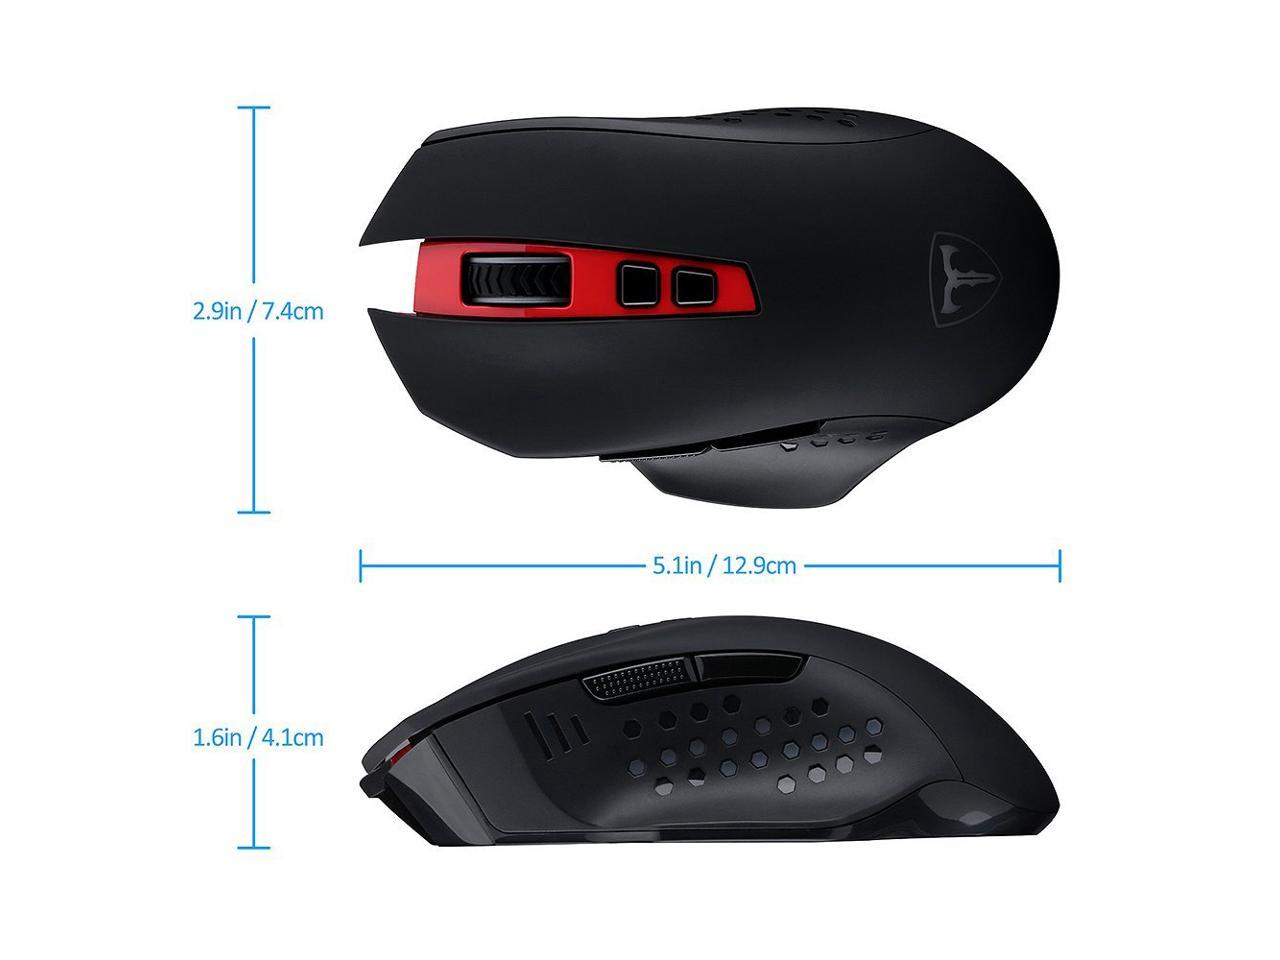 et wireless mouse software update 1.0